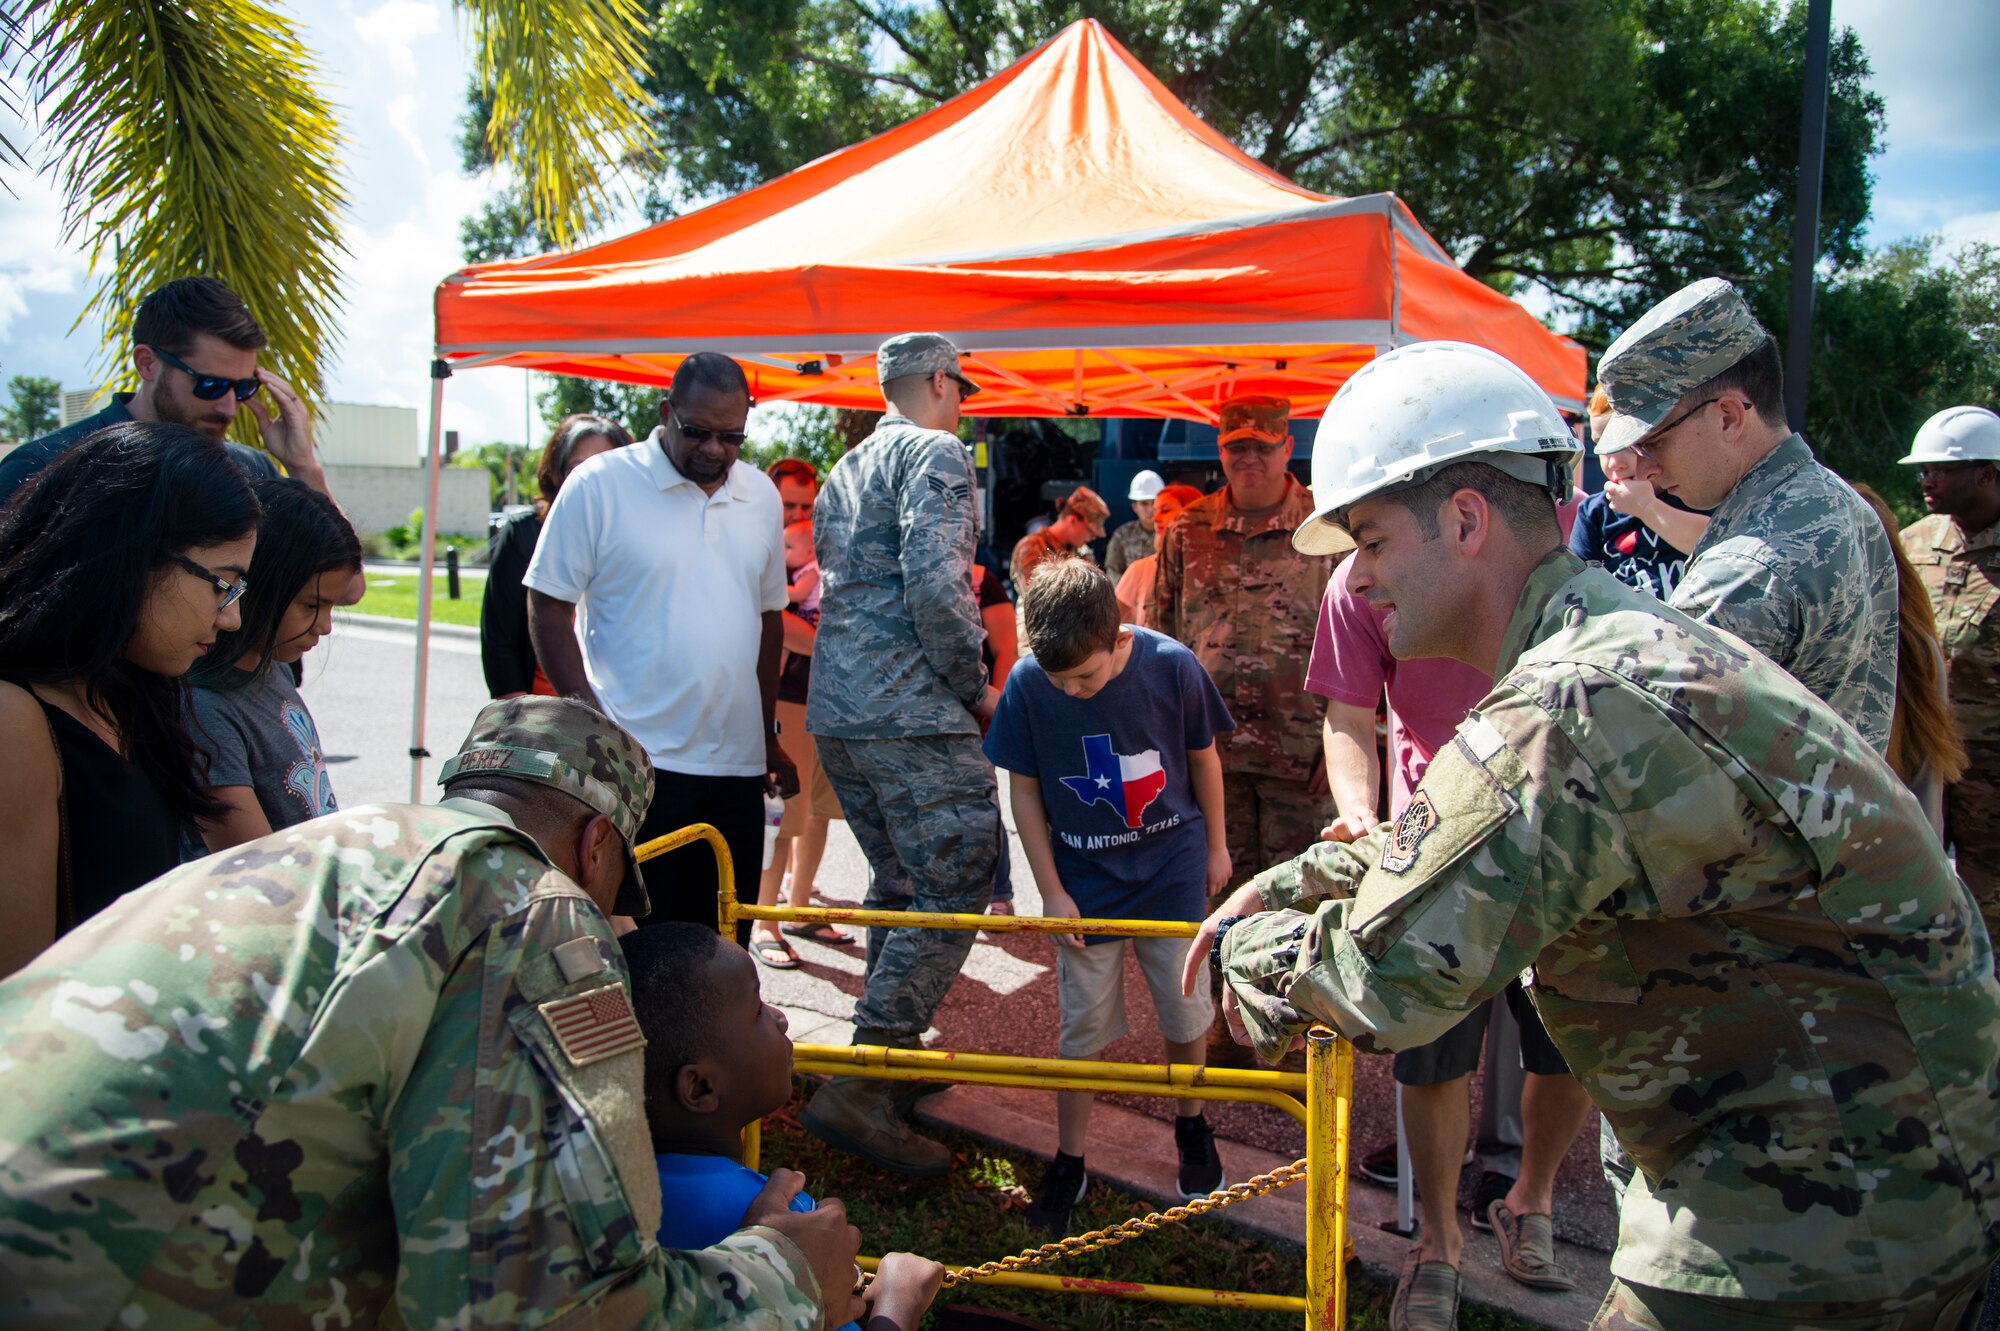 Airmen assigned to the 6th Communications Squadron and their families look at a manhole while learning about the mission of the cable team during an open house at MacDill Air Force Base, Fla., August 9, 2019.